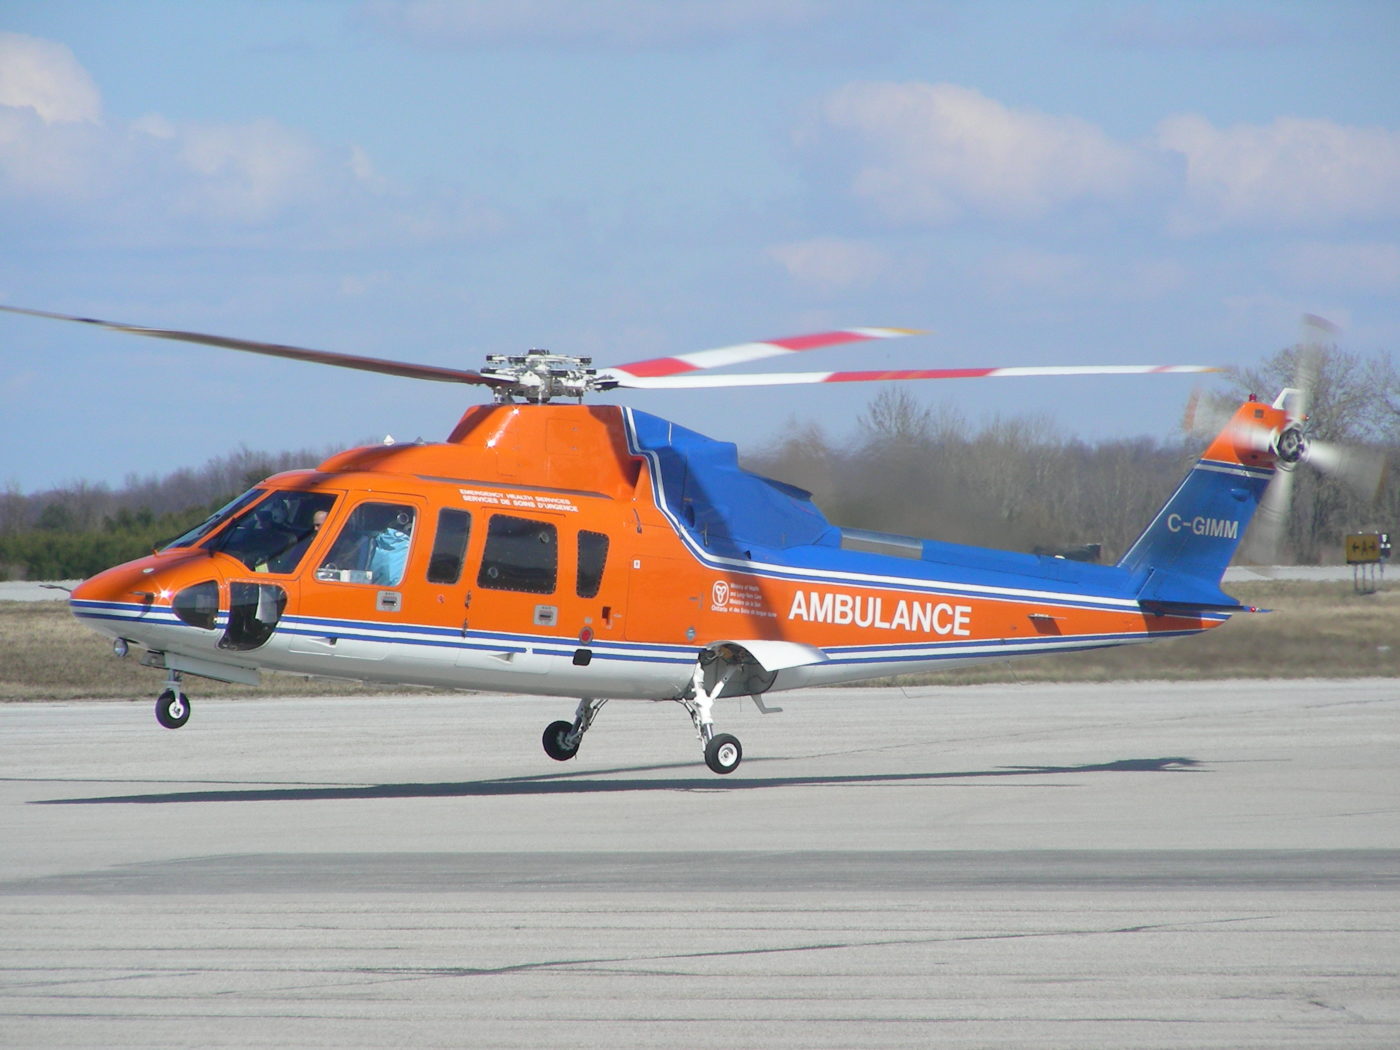 In the future, Fanshawe plans to extend training opportunities using the helicopter to all community paramedic services, fire departments and police services.